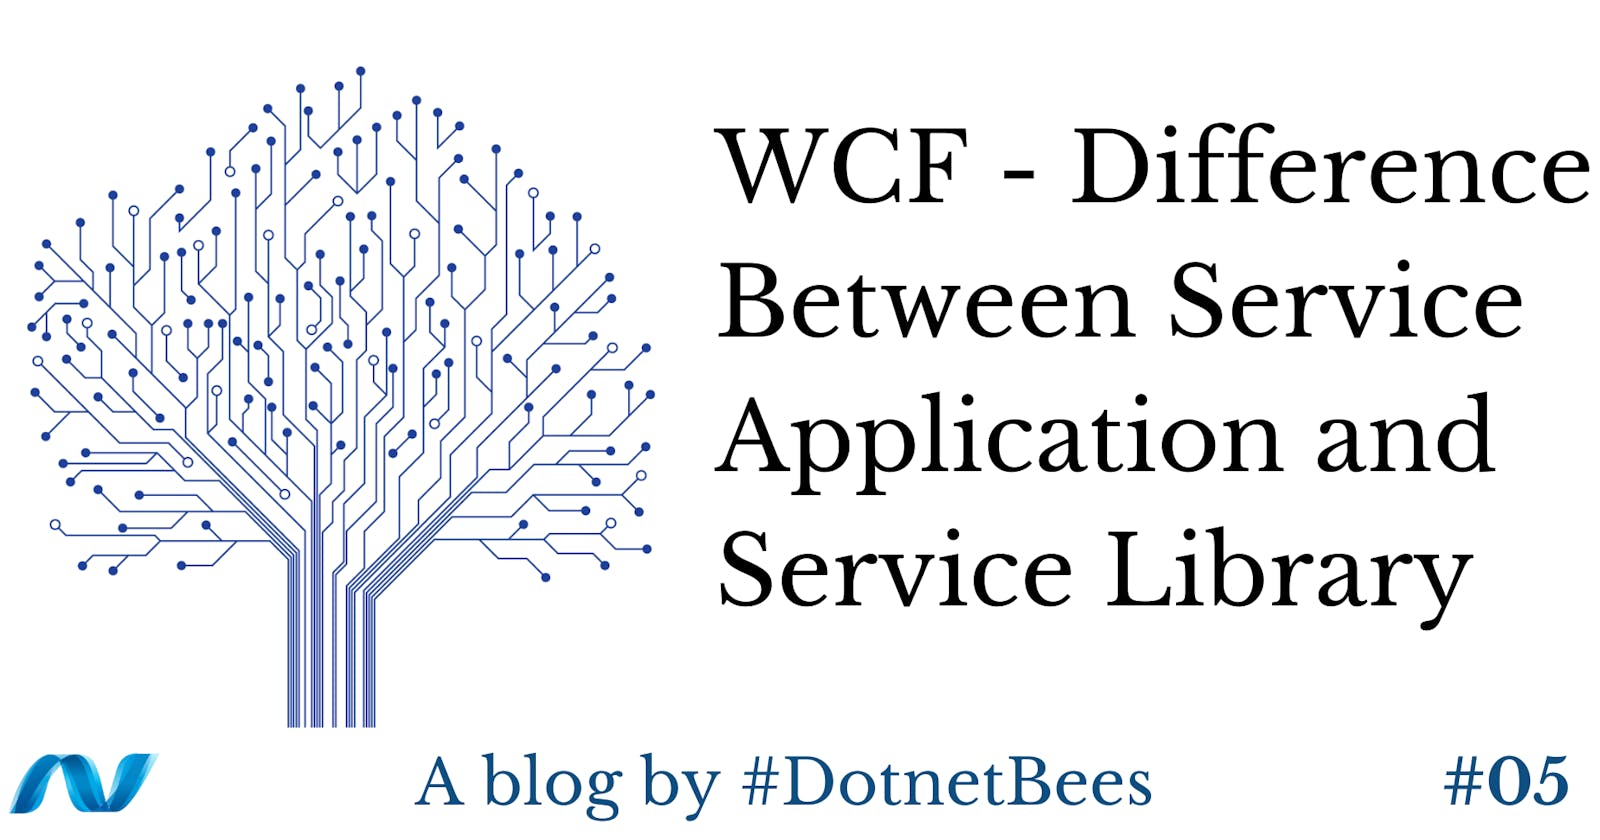 WCF - Difference Between Service Application and Service Library